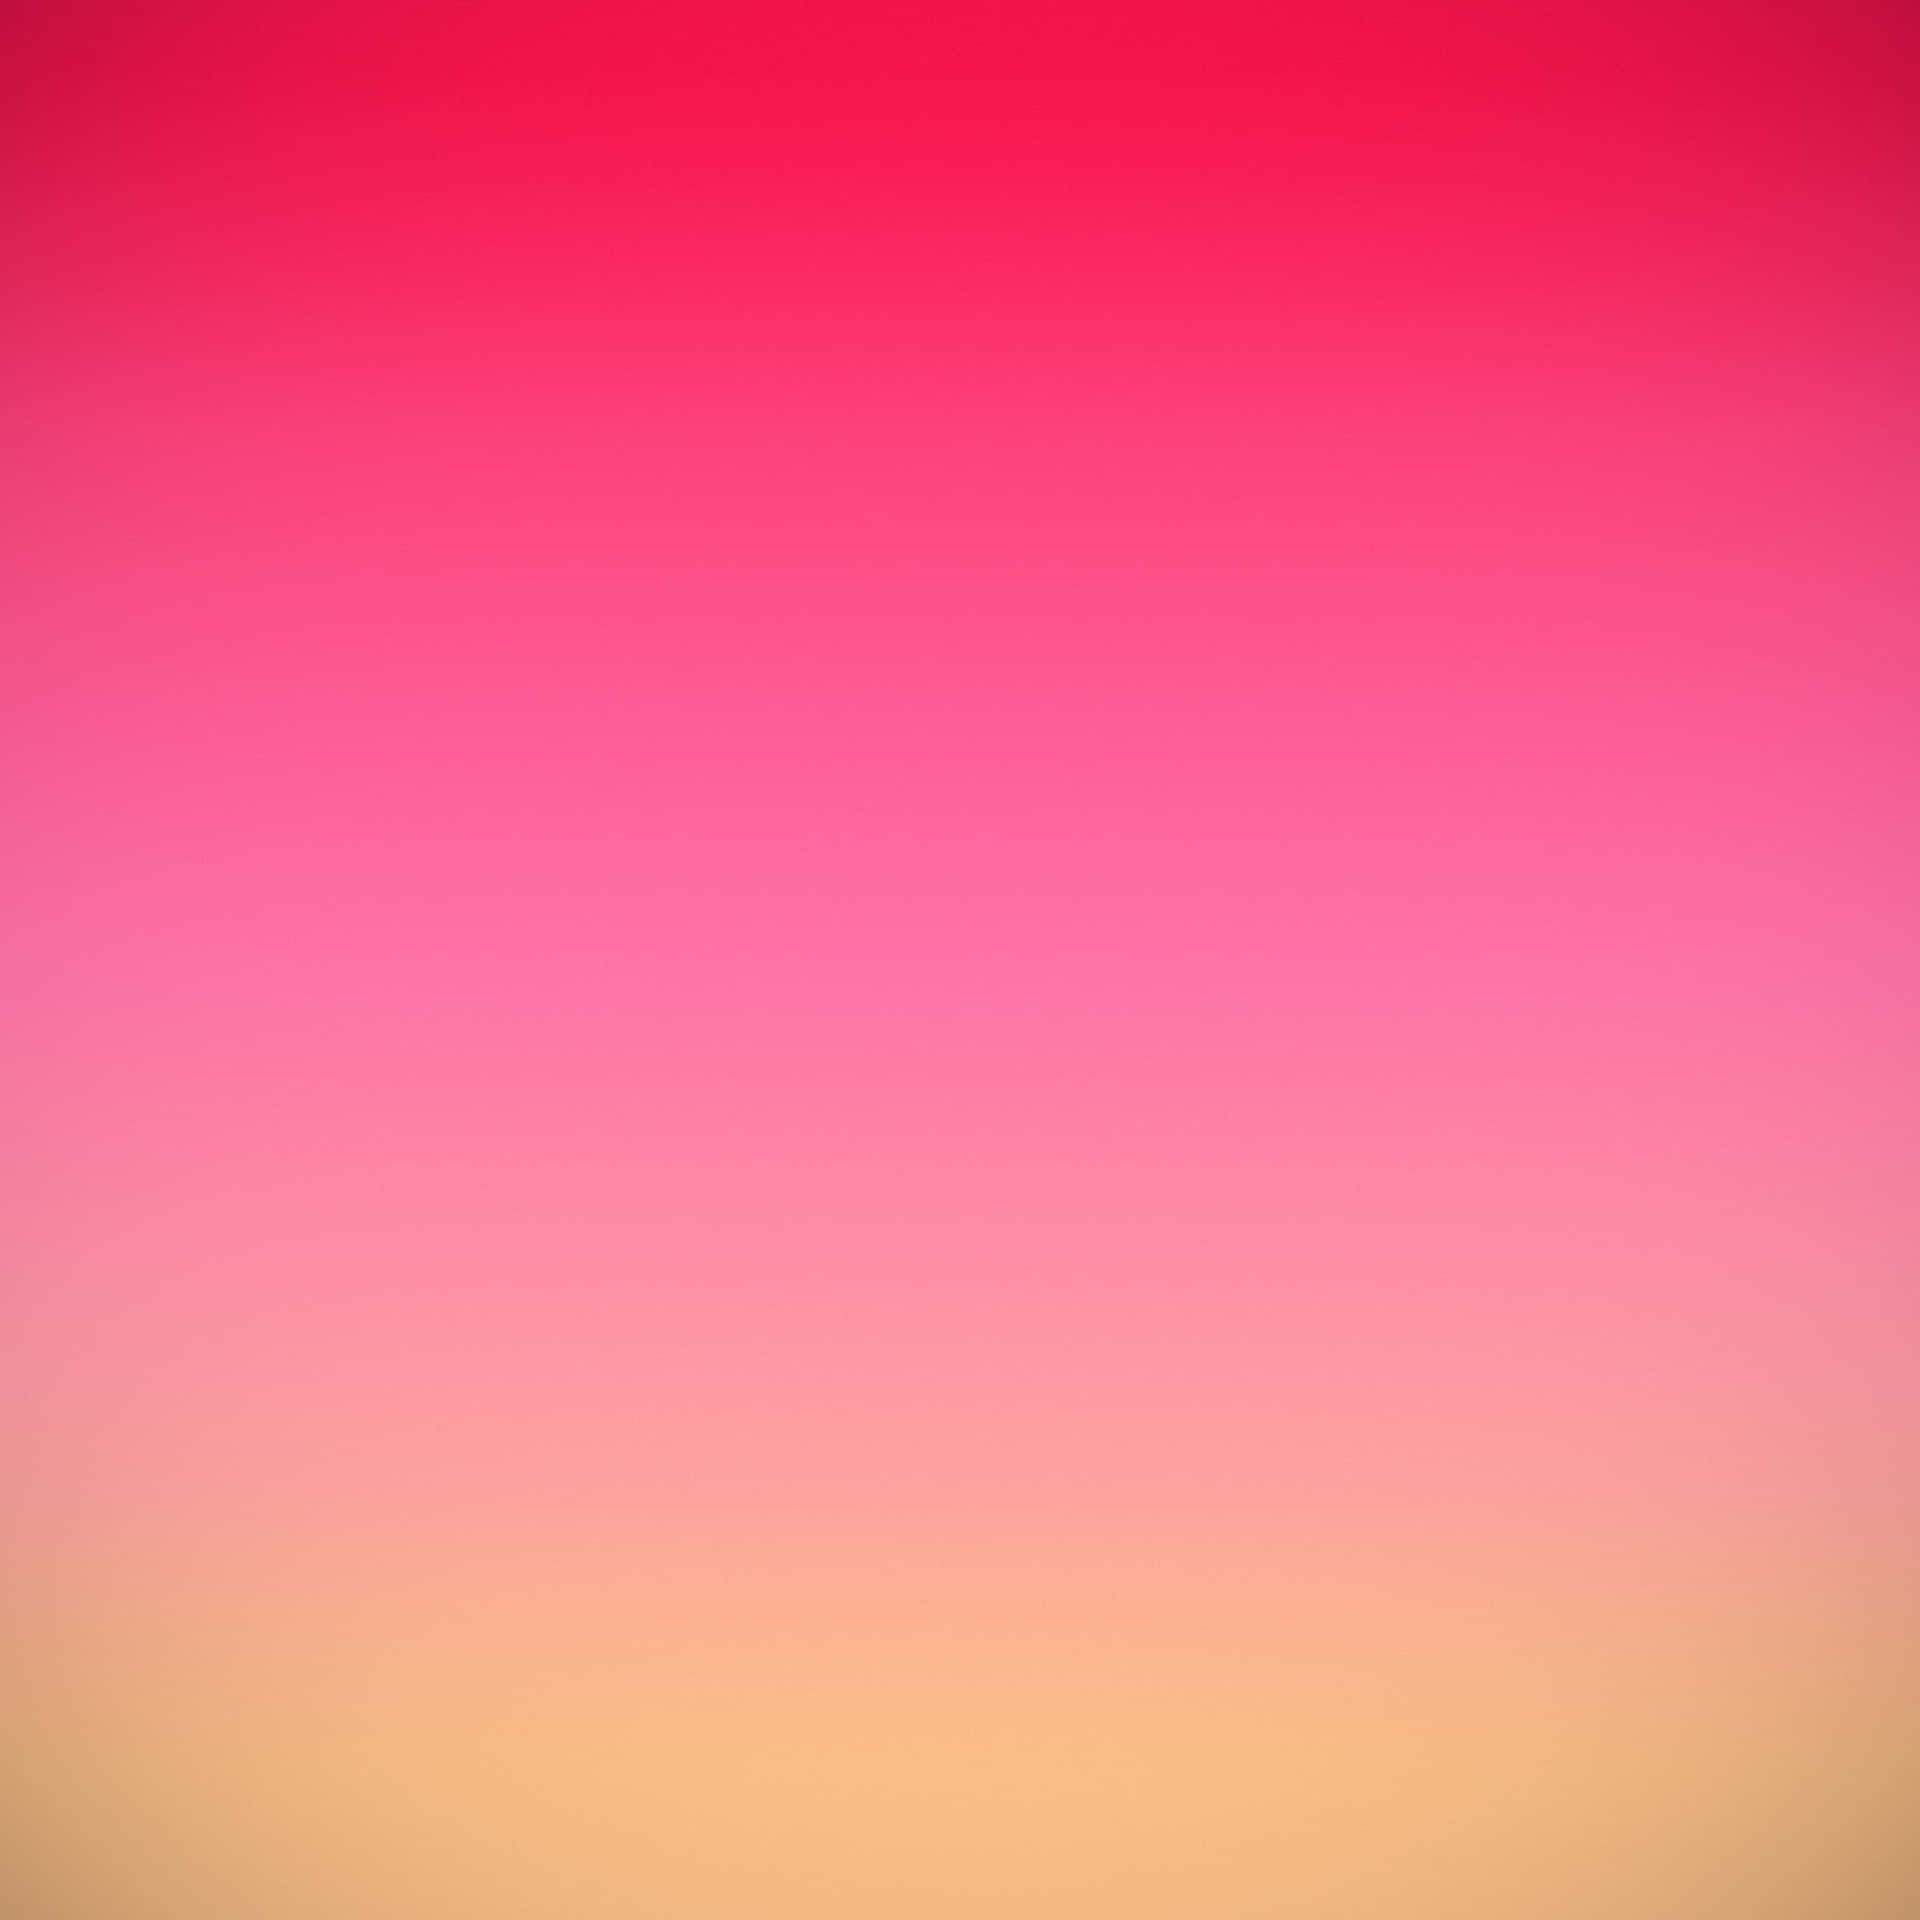 A Pink And Yellow Gradient Background Wallpaper